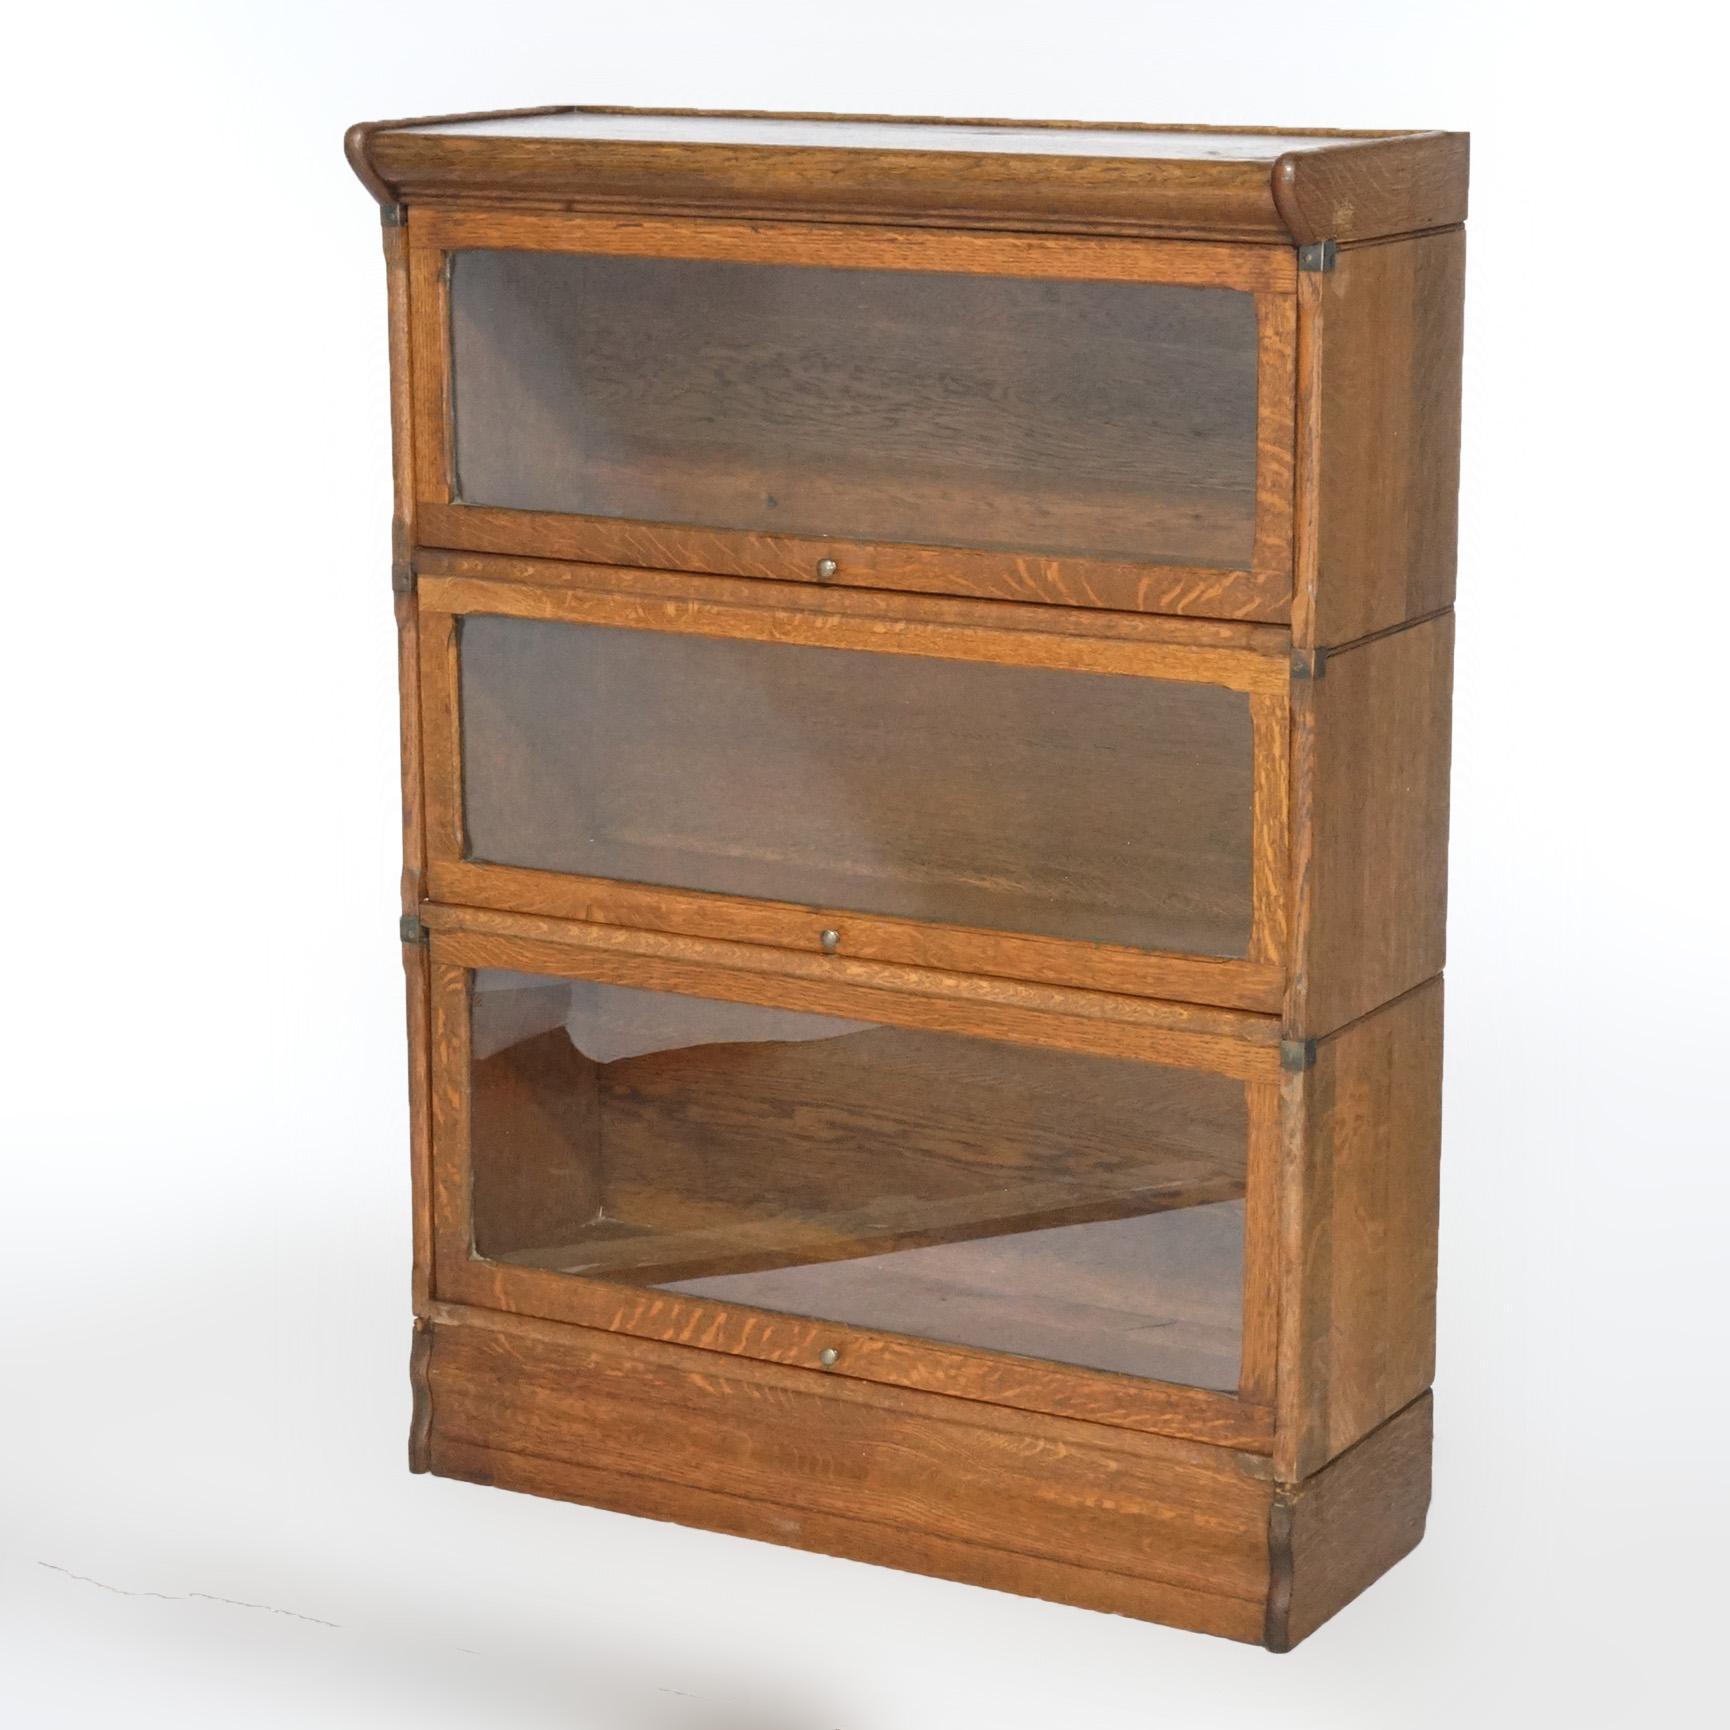 An antique Arts & Crafts barrister bookcase in the manner of Globe Wernicke offers quarter sawn oak construction with three stack having pull out glass doors, raised on ogee base, circa 1910.

Measures- 47.25''H x 34''W x 13.5''D.